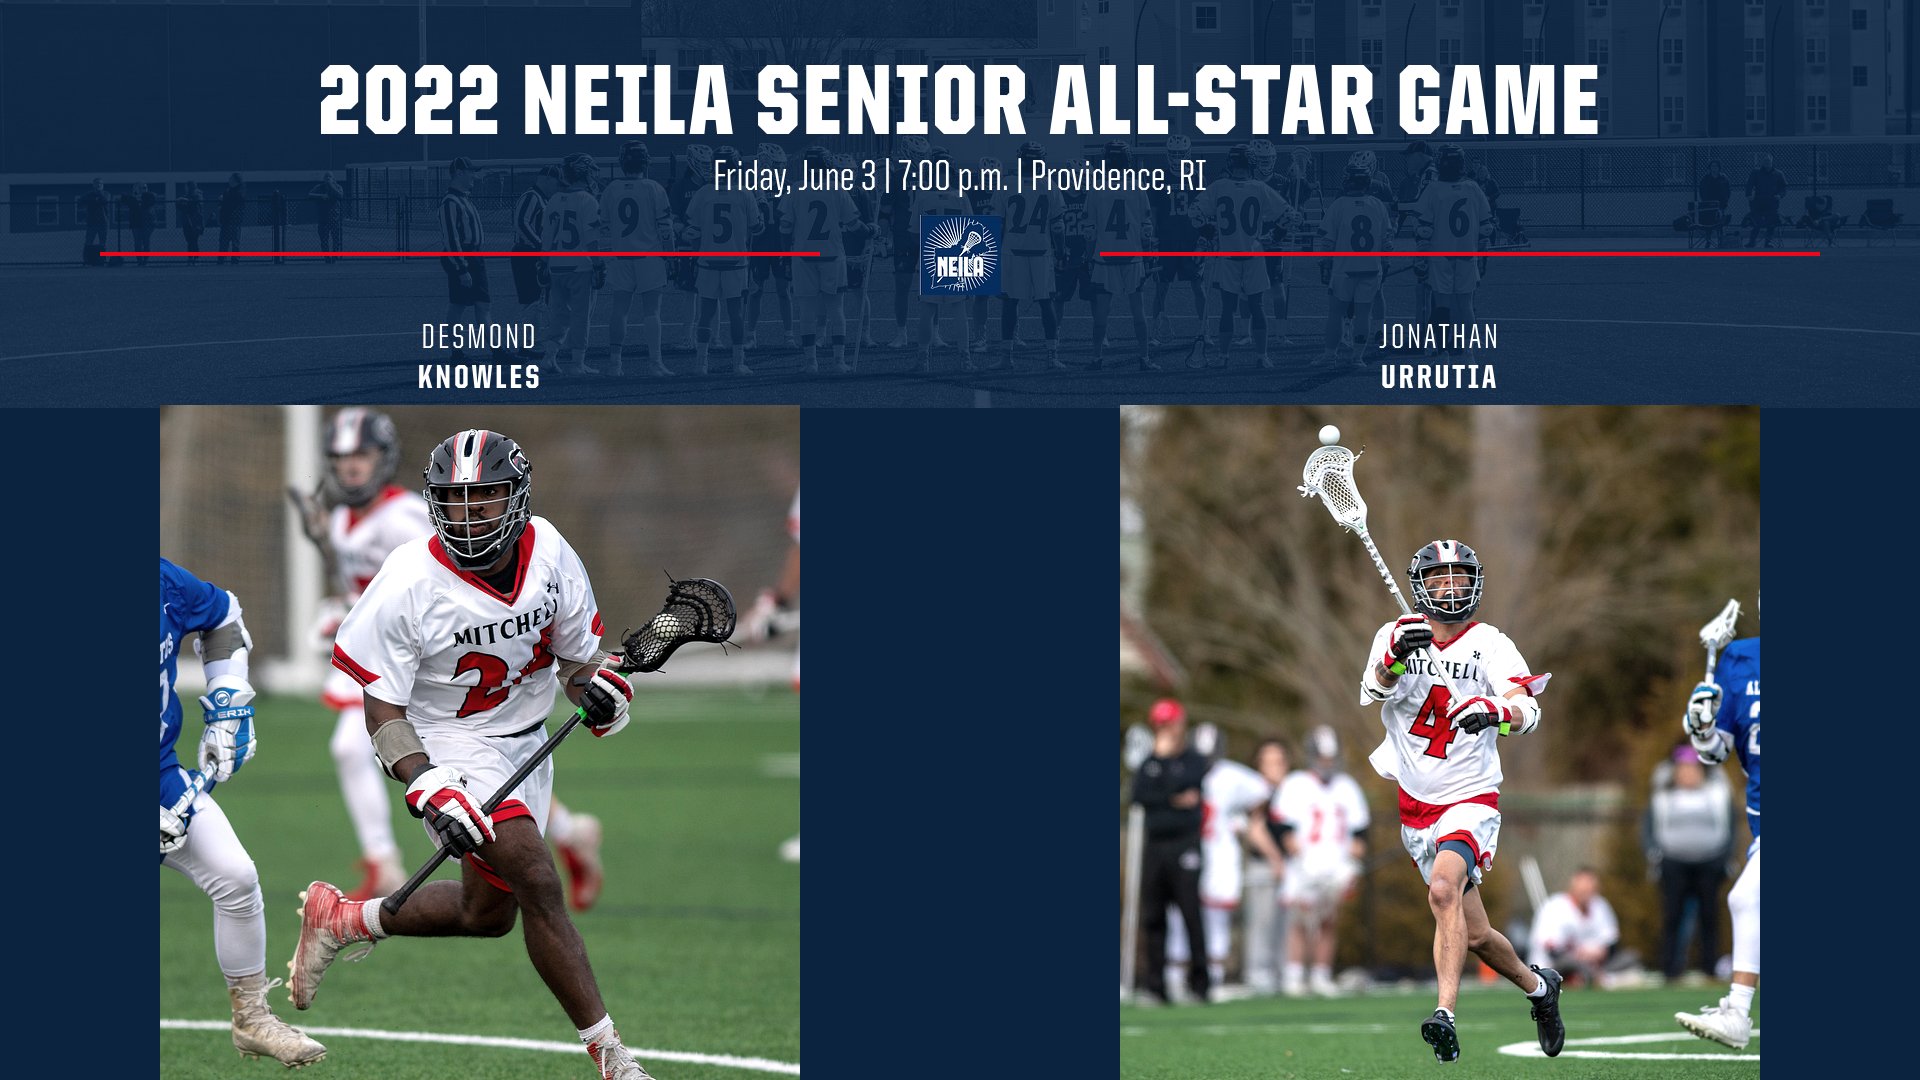 LAX Duo Named to NEILA All-Star Game Roster